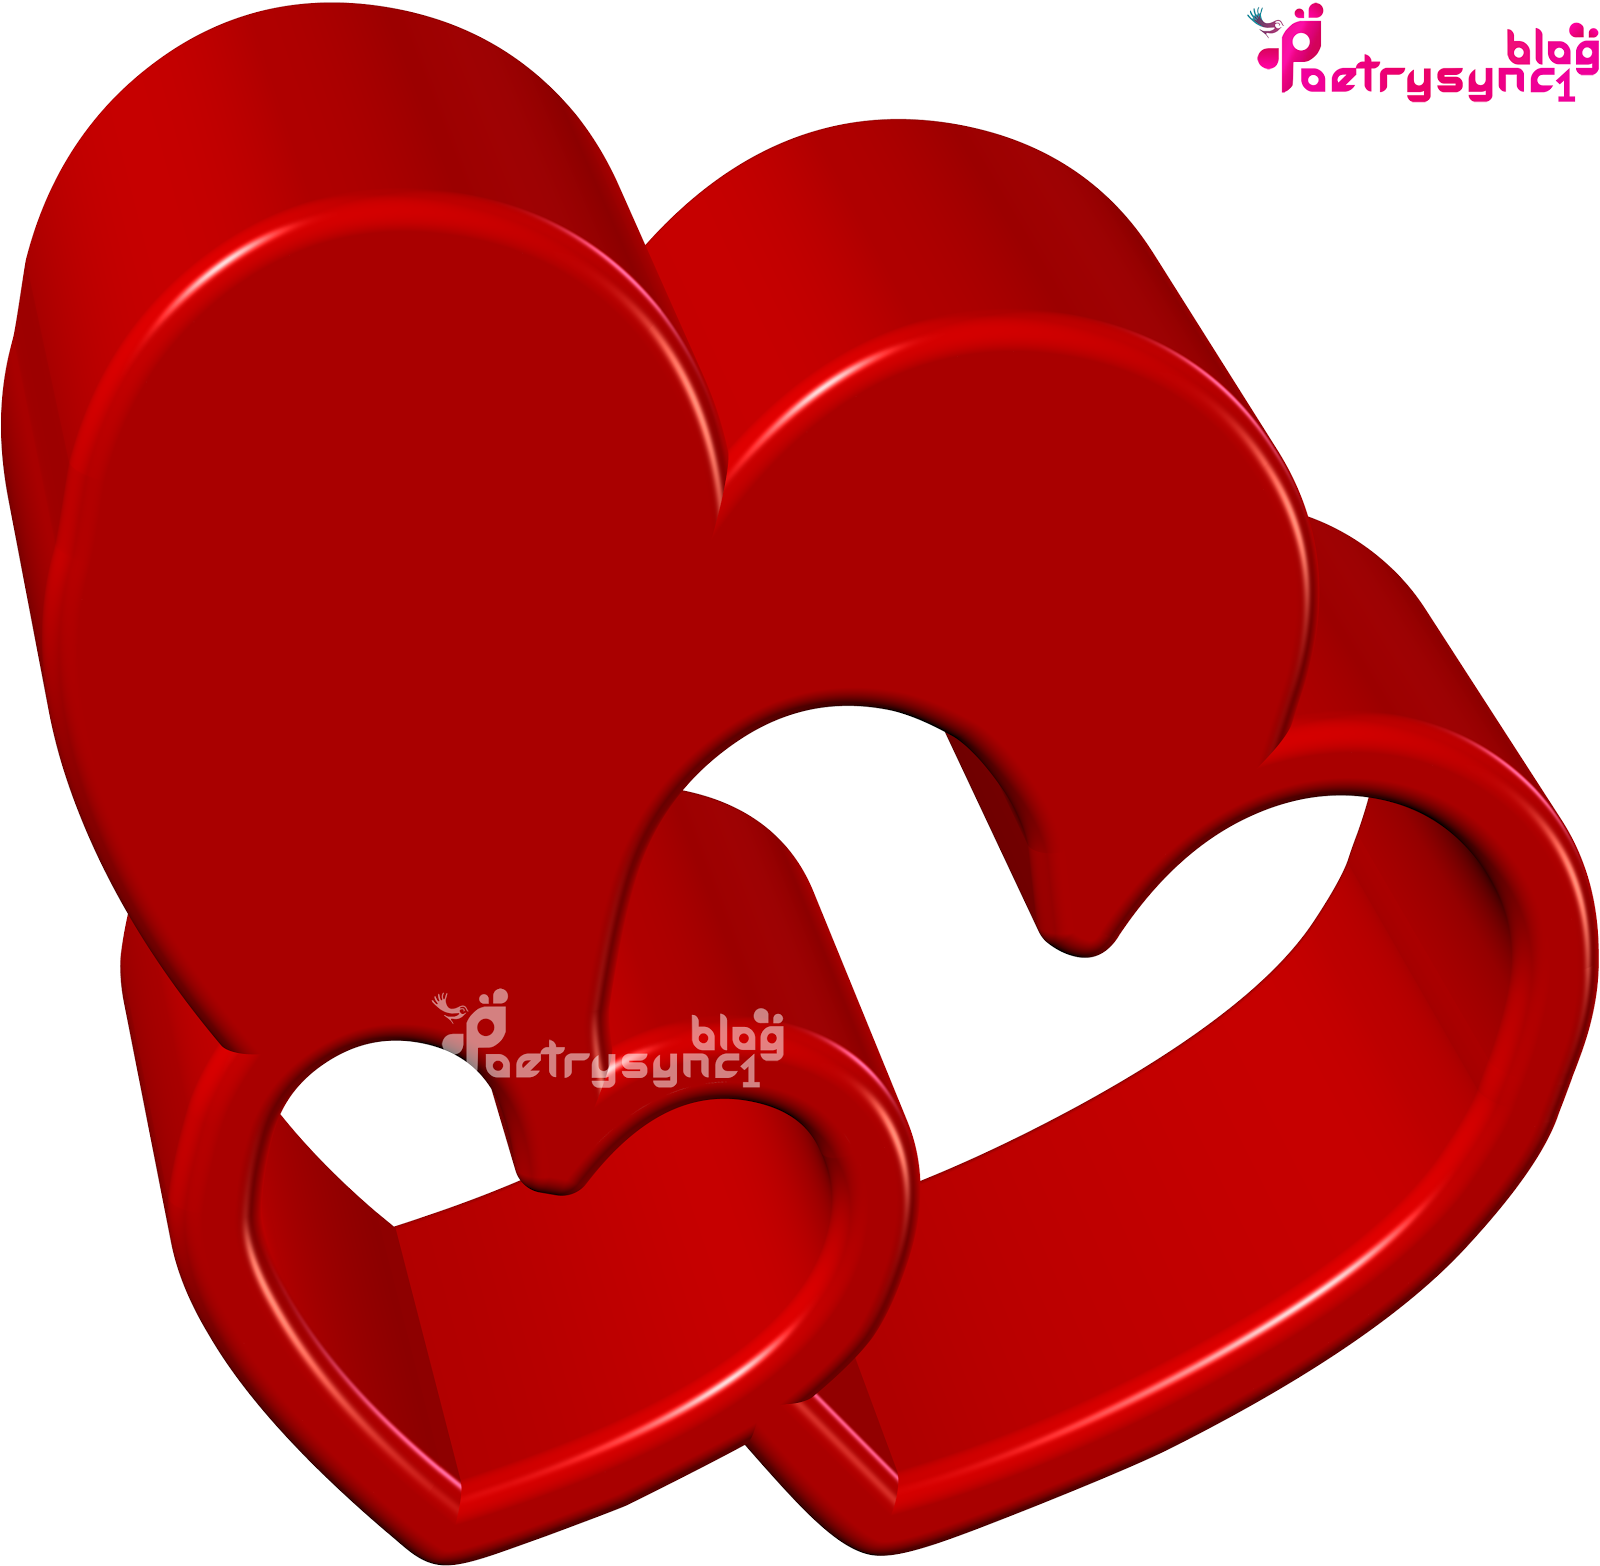 Love-3D-3-Hearts-Image-Wallpaper-In-Red-Colour-By-Poetrysync1.blog